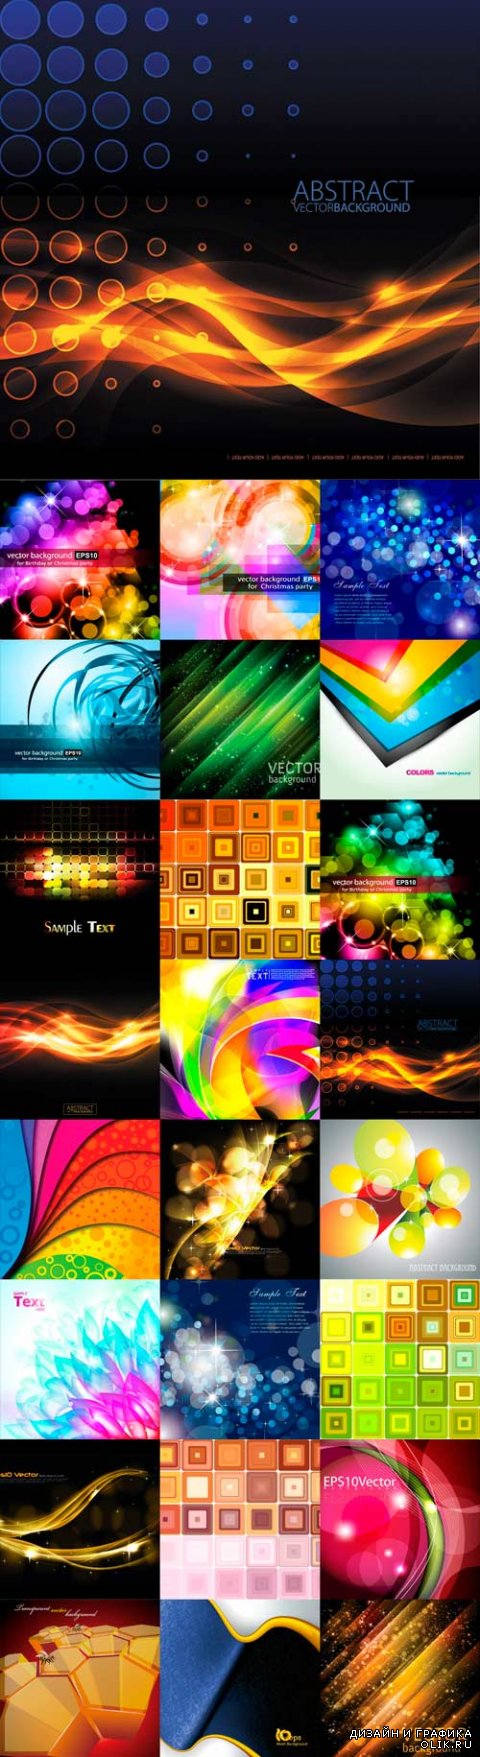 Bright colorful abstract backgrounds vector -32